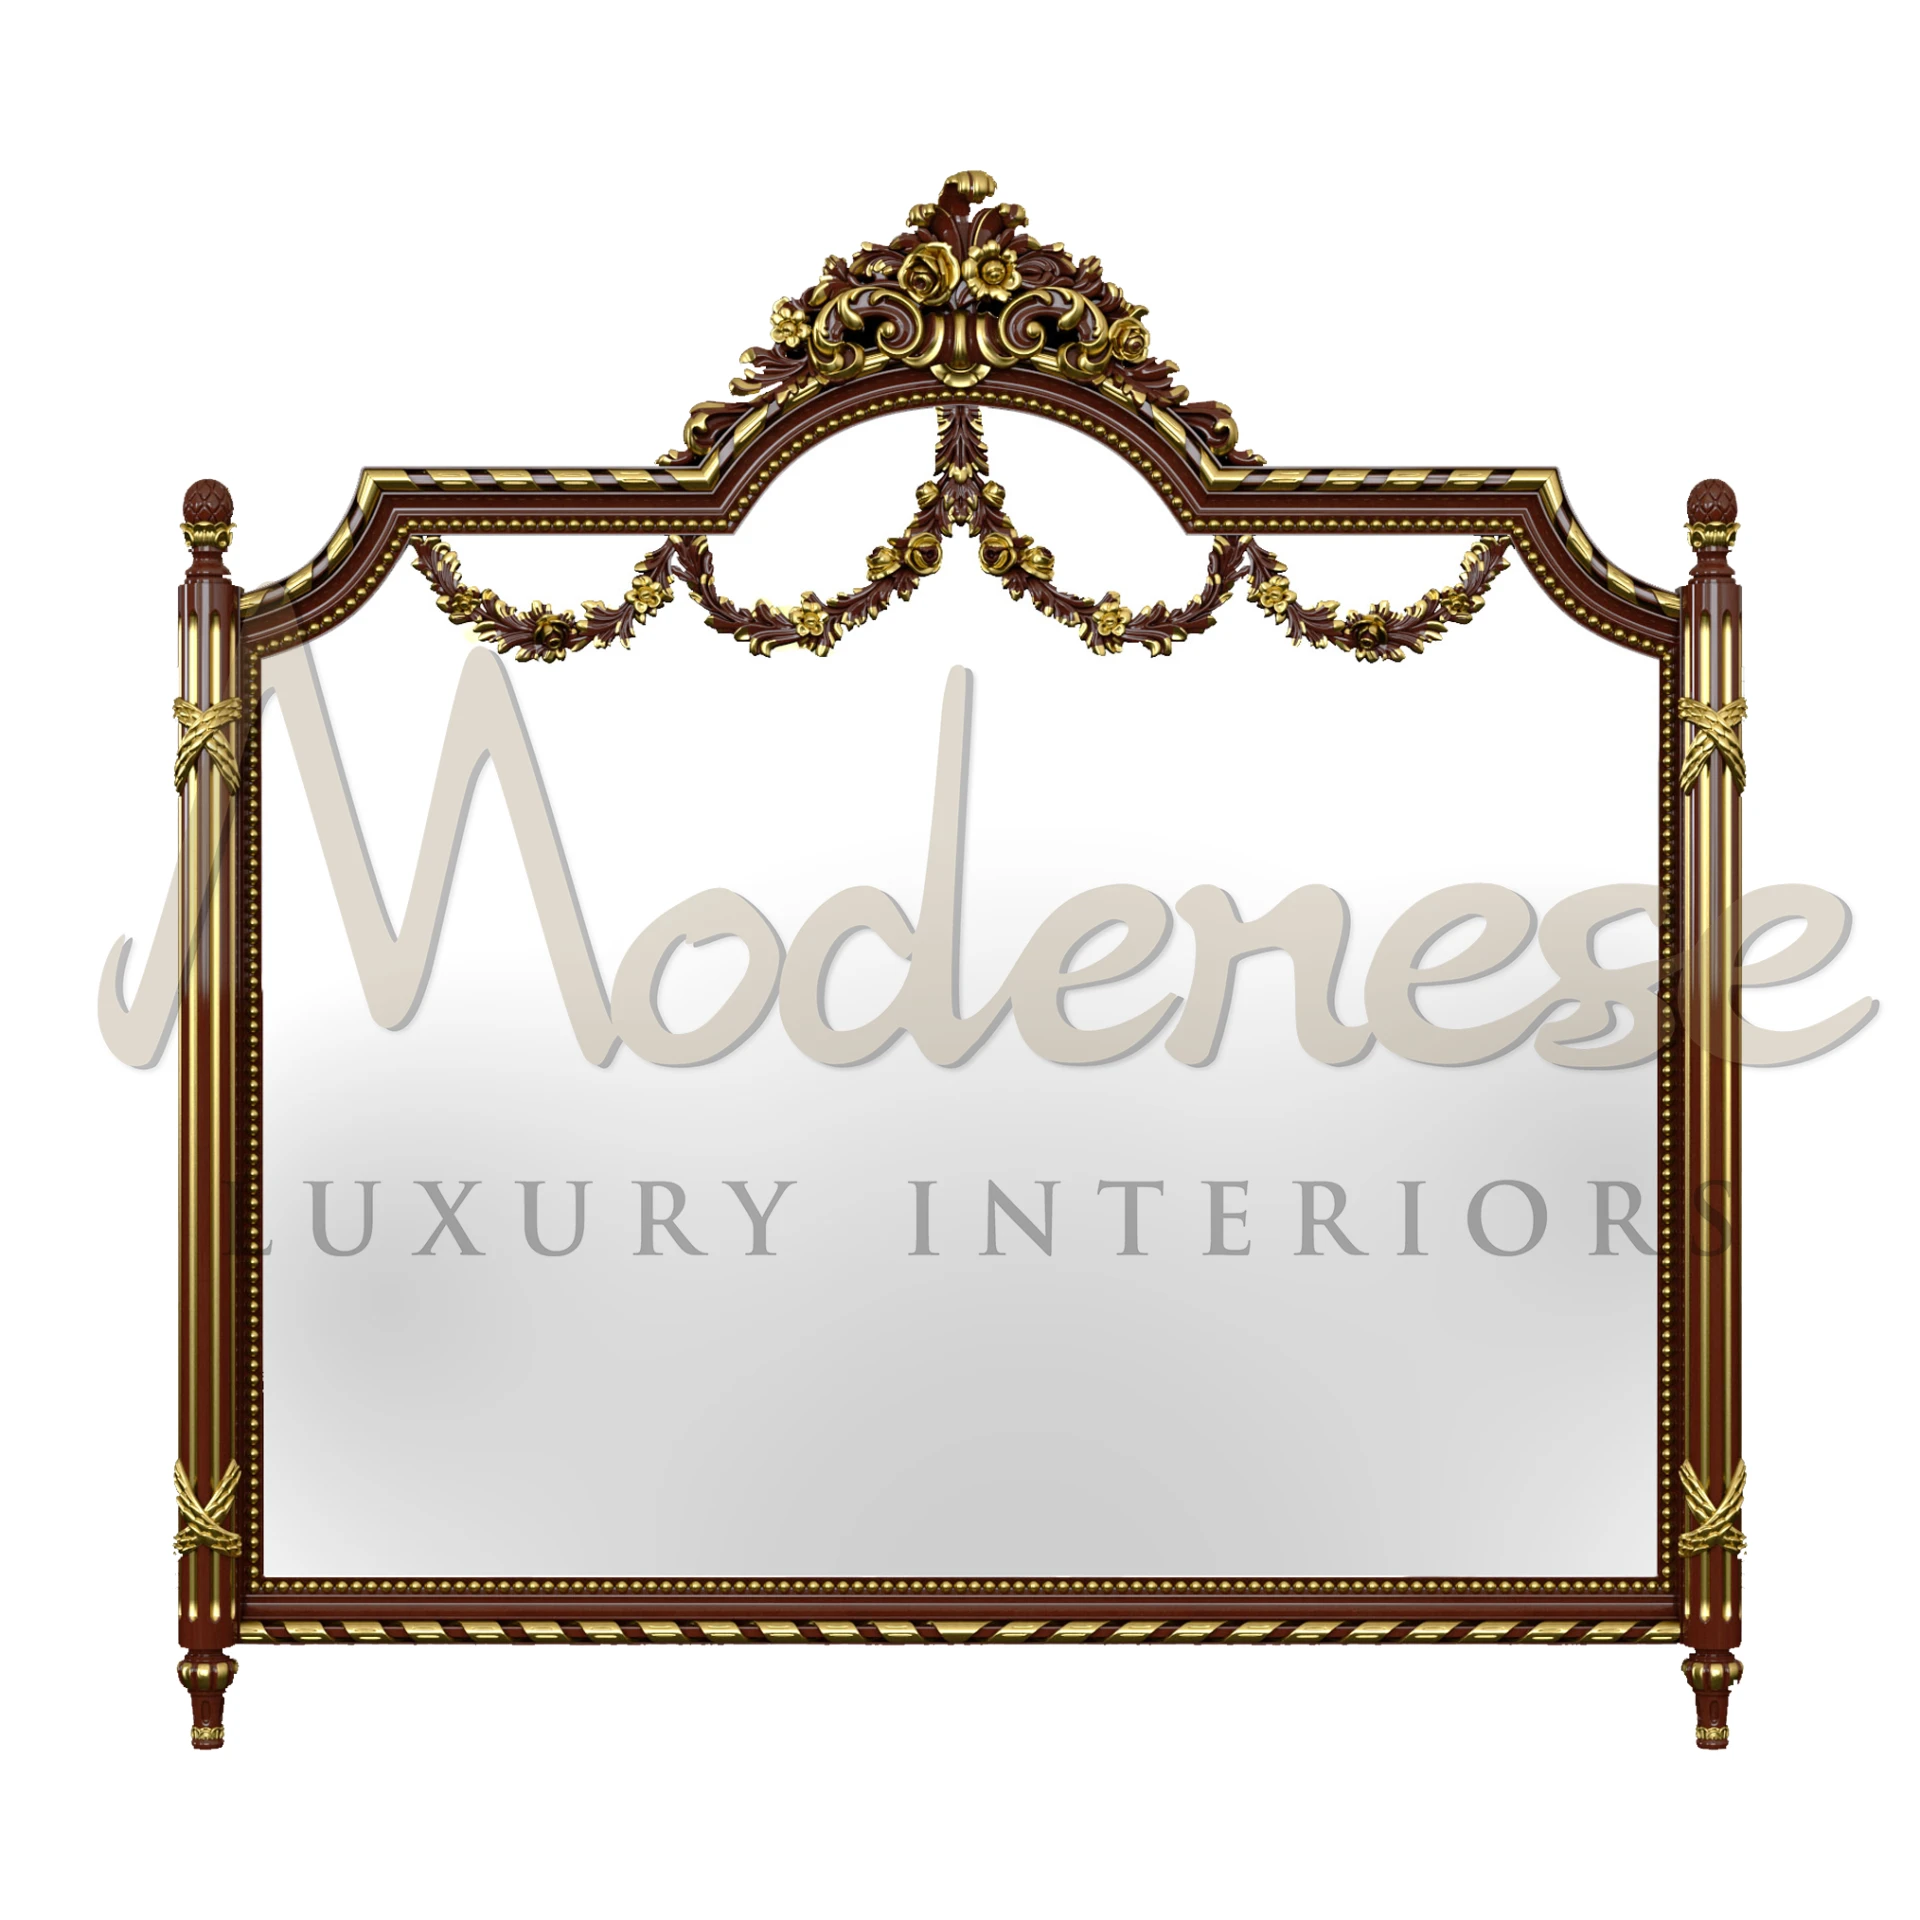 Glamour Figured Mirror in various sizes, showcasing luxury and classic style with handmade Italian design for elegant home decor.